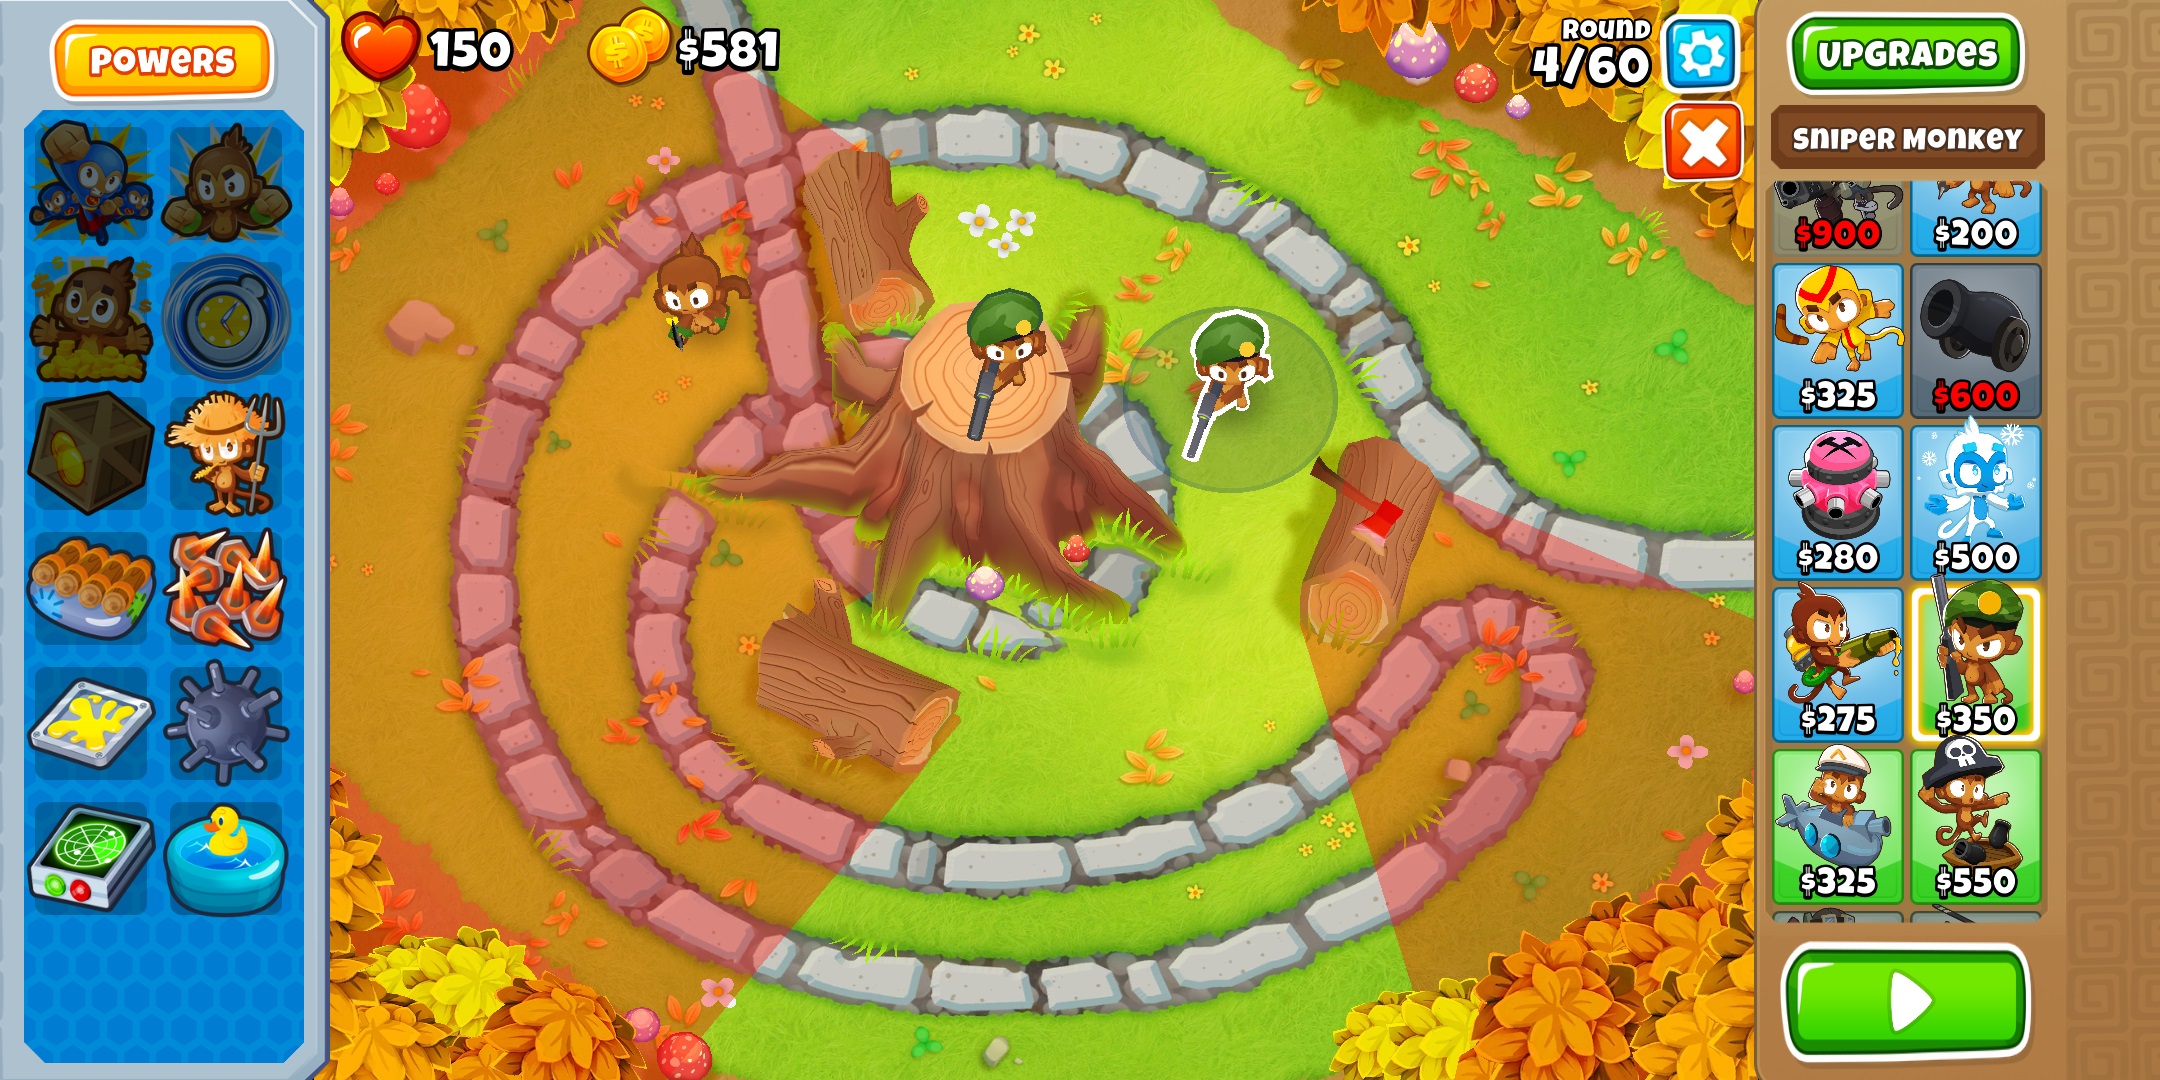 Bloons TD 6 Tips and Tricks Sniper